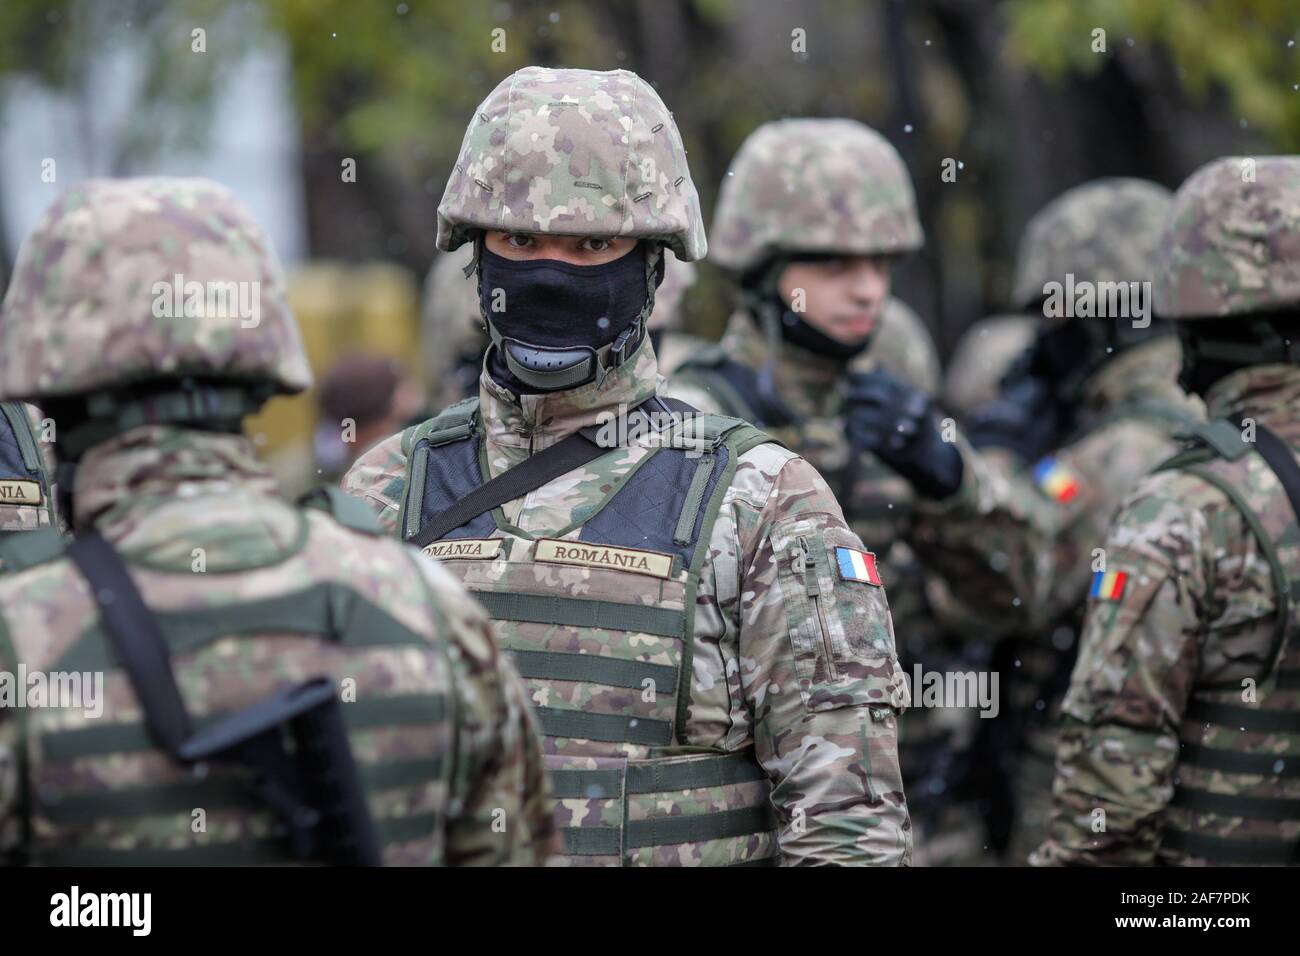 Bucharest, Romania - December 01, 2019: Romanian army soldiers at the Romanian National Day military parade. Stock Photo